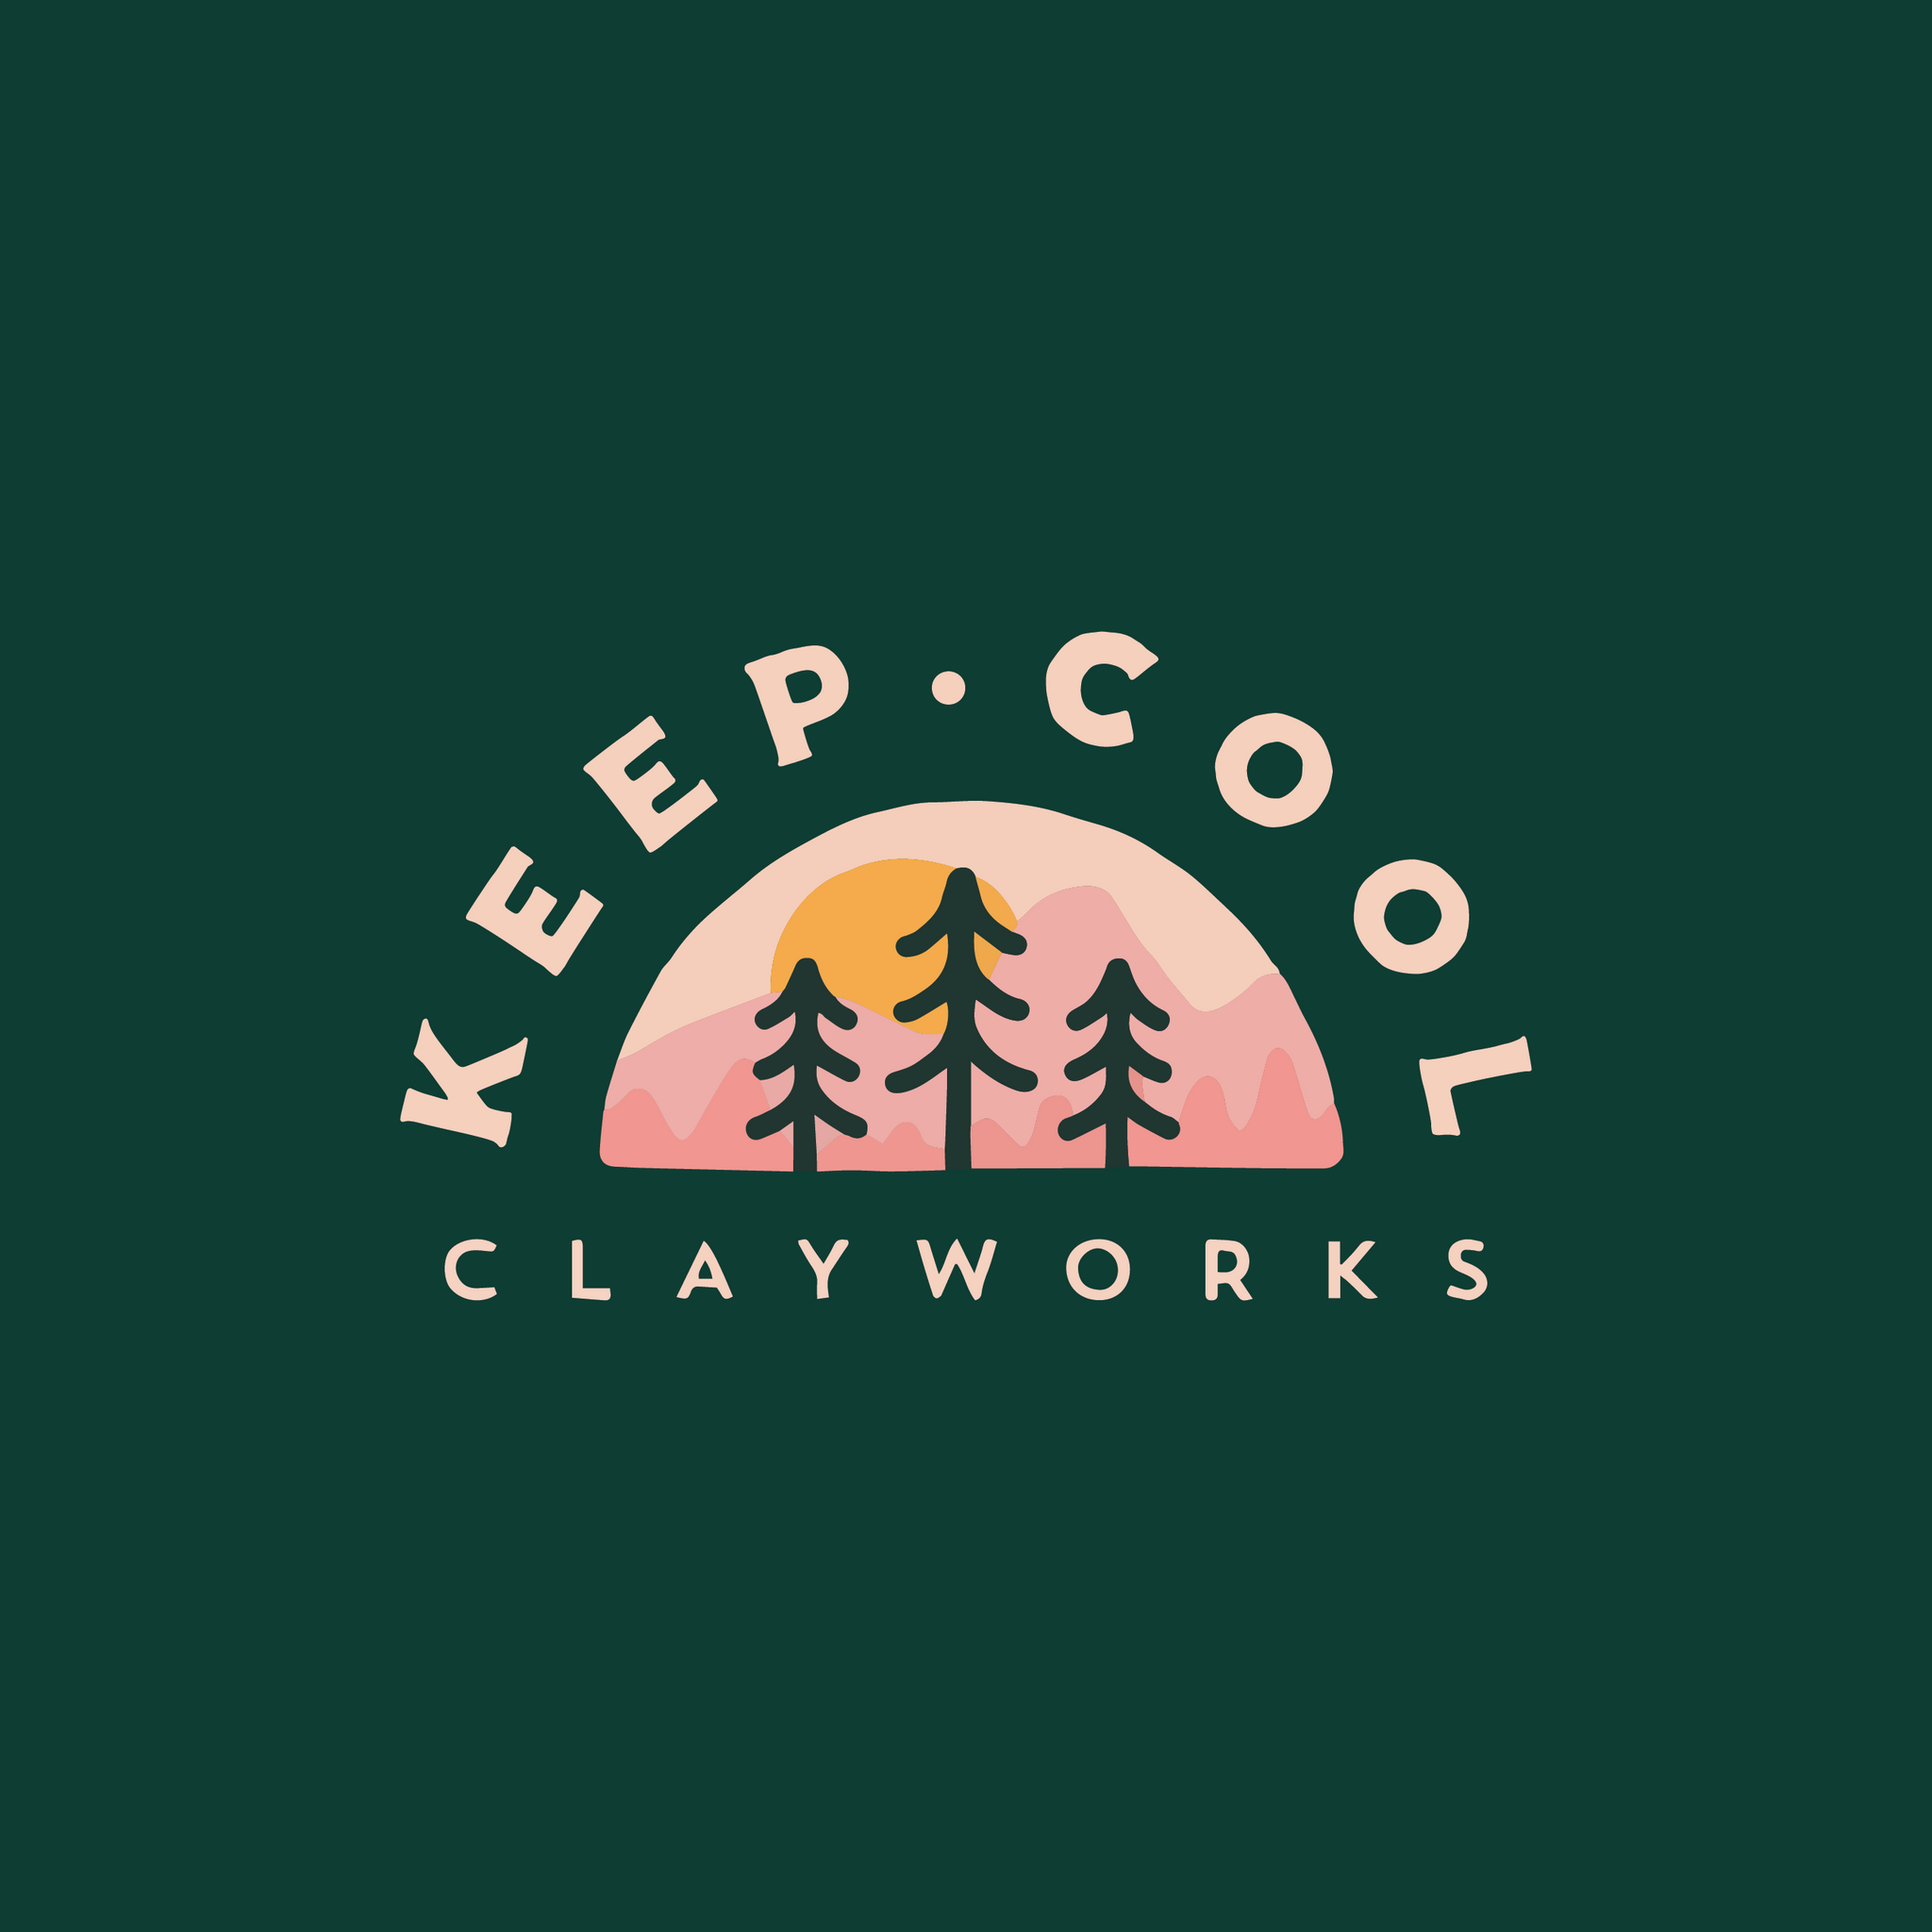 Keep Cool Clayworks Gift Card